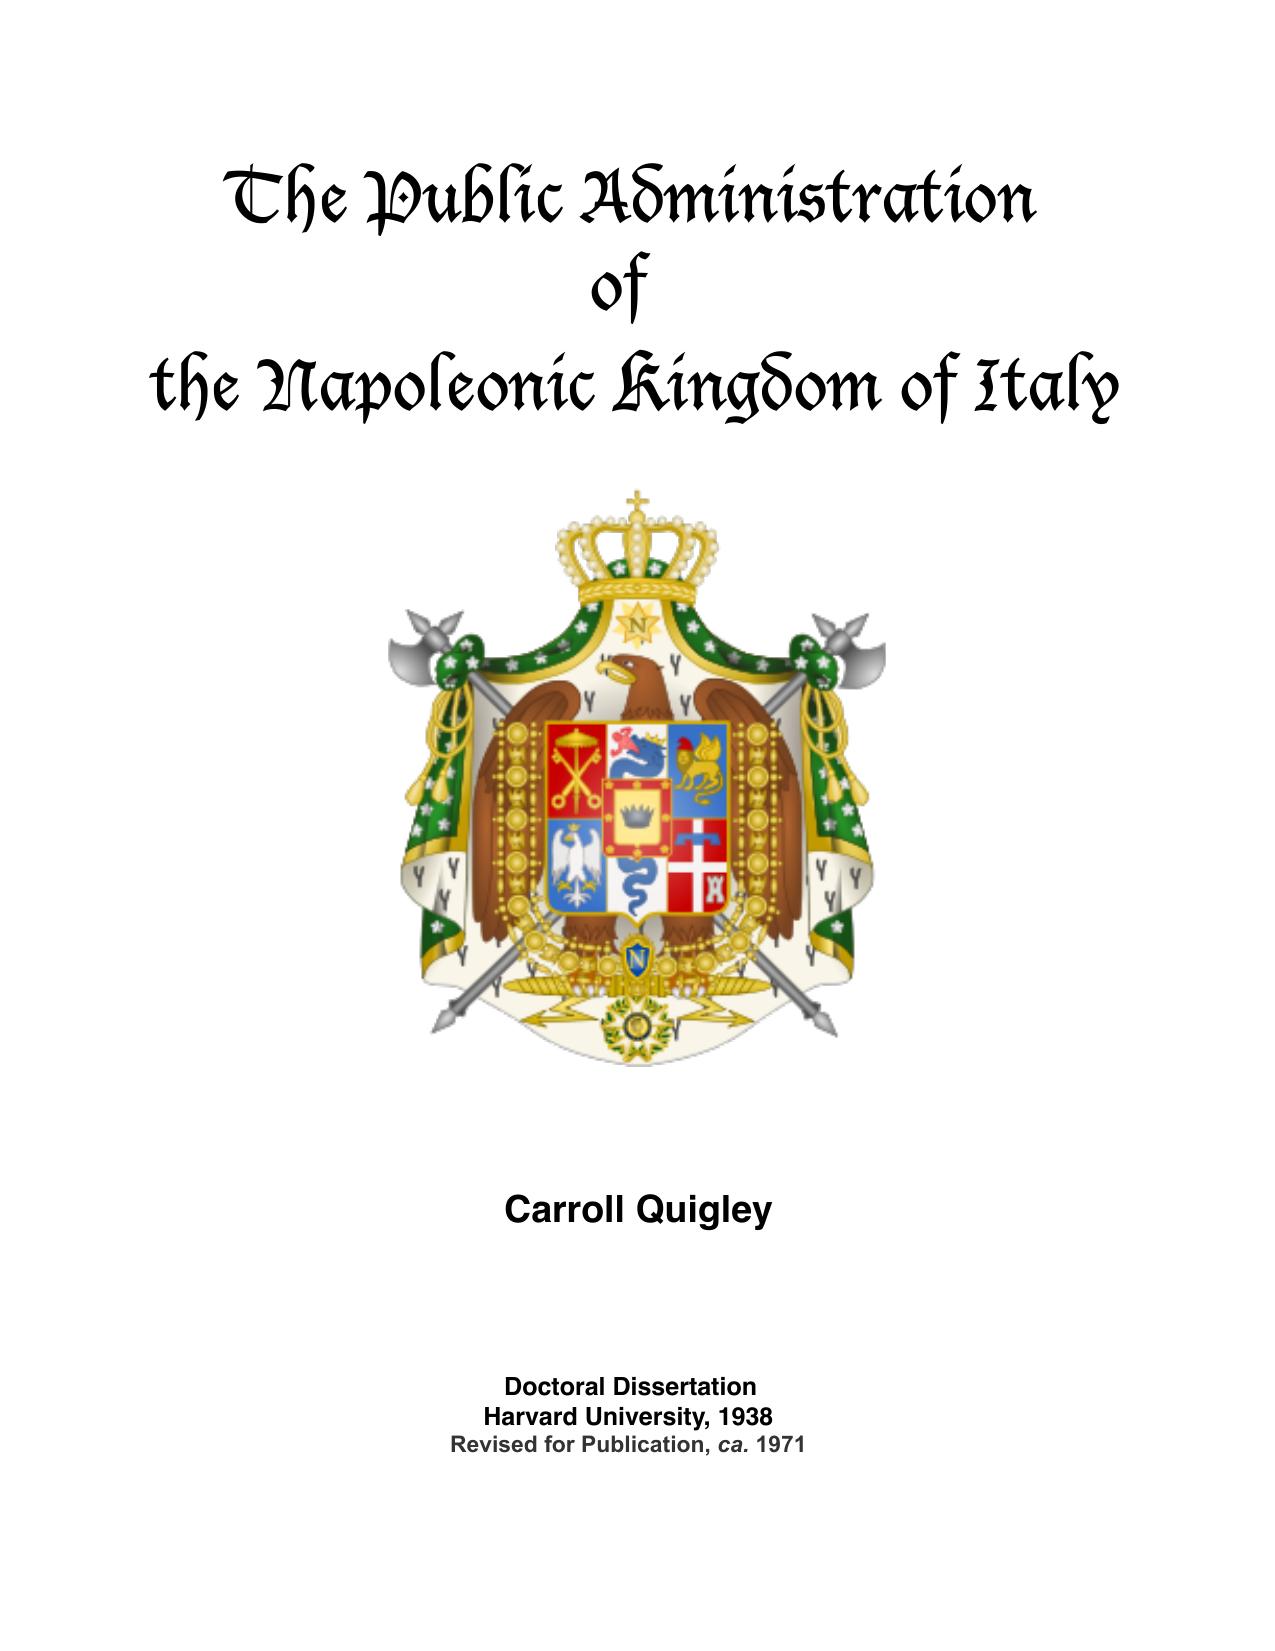 The Public Administration of the Napoleonic Kingdom of Italy